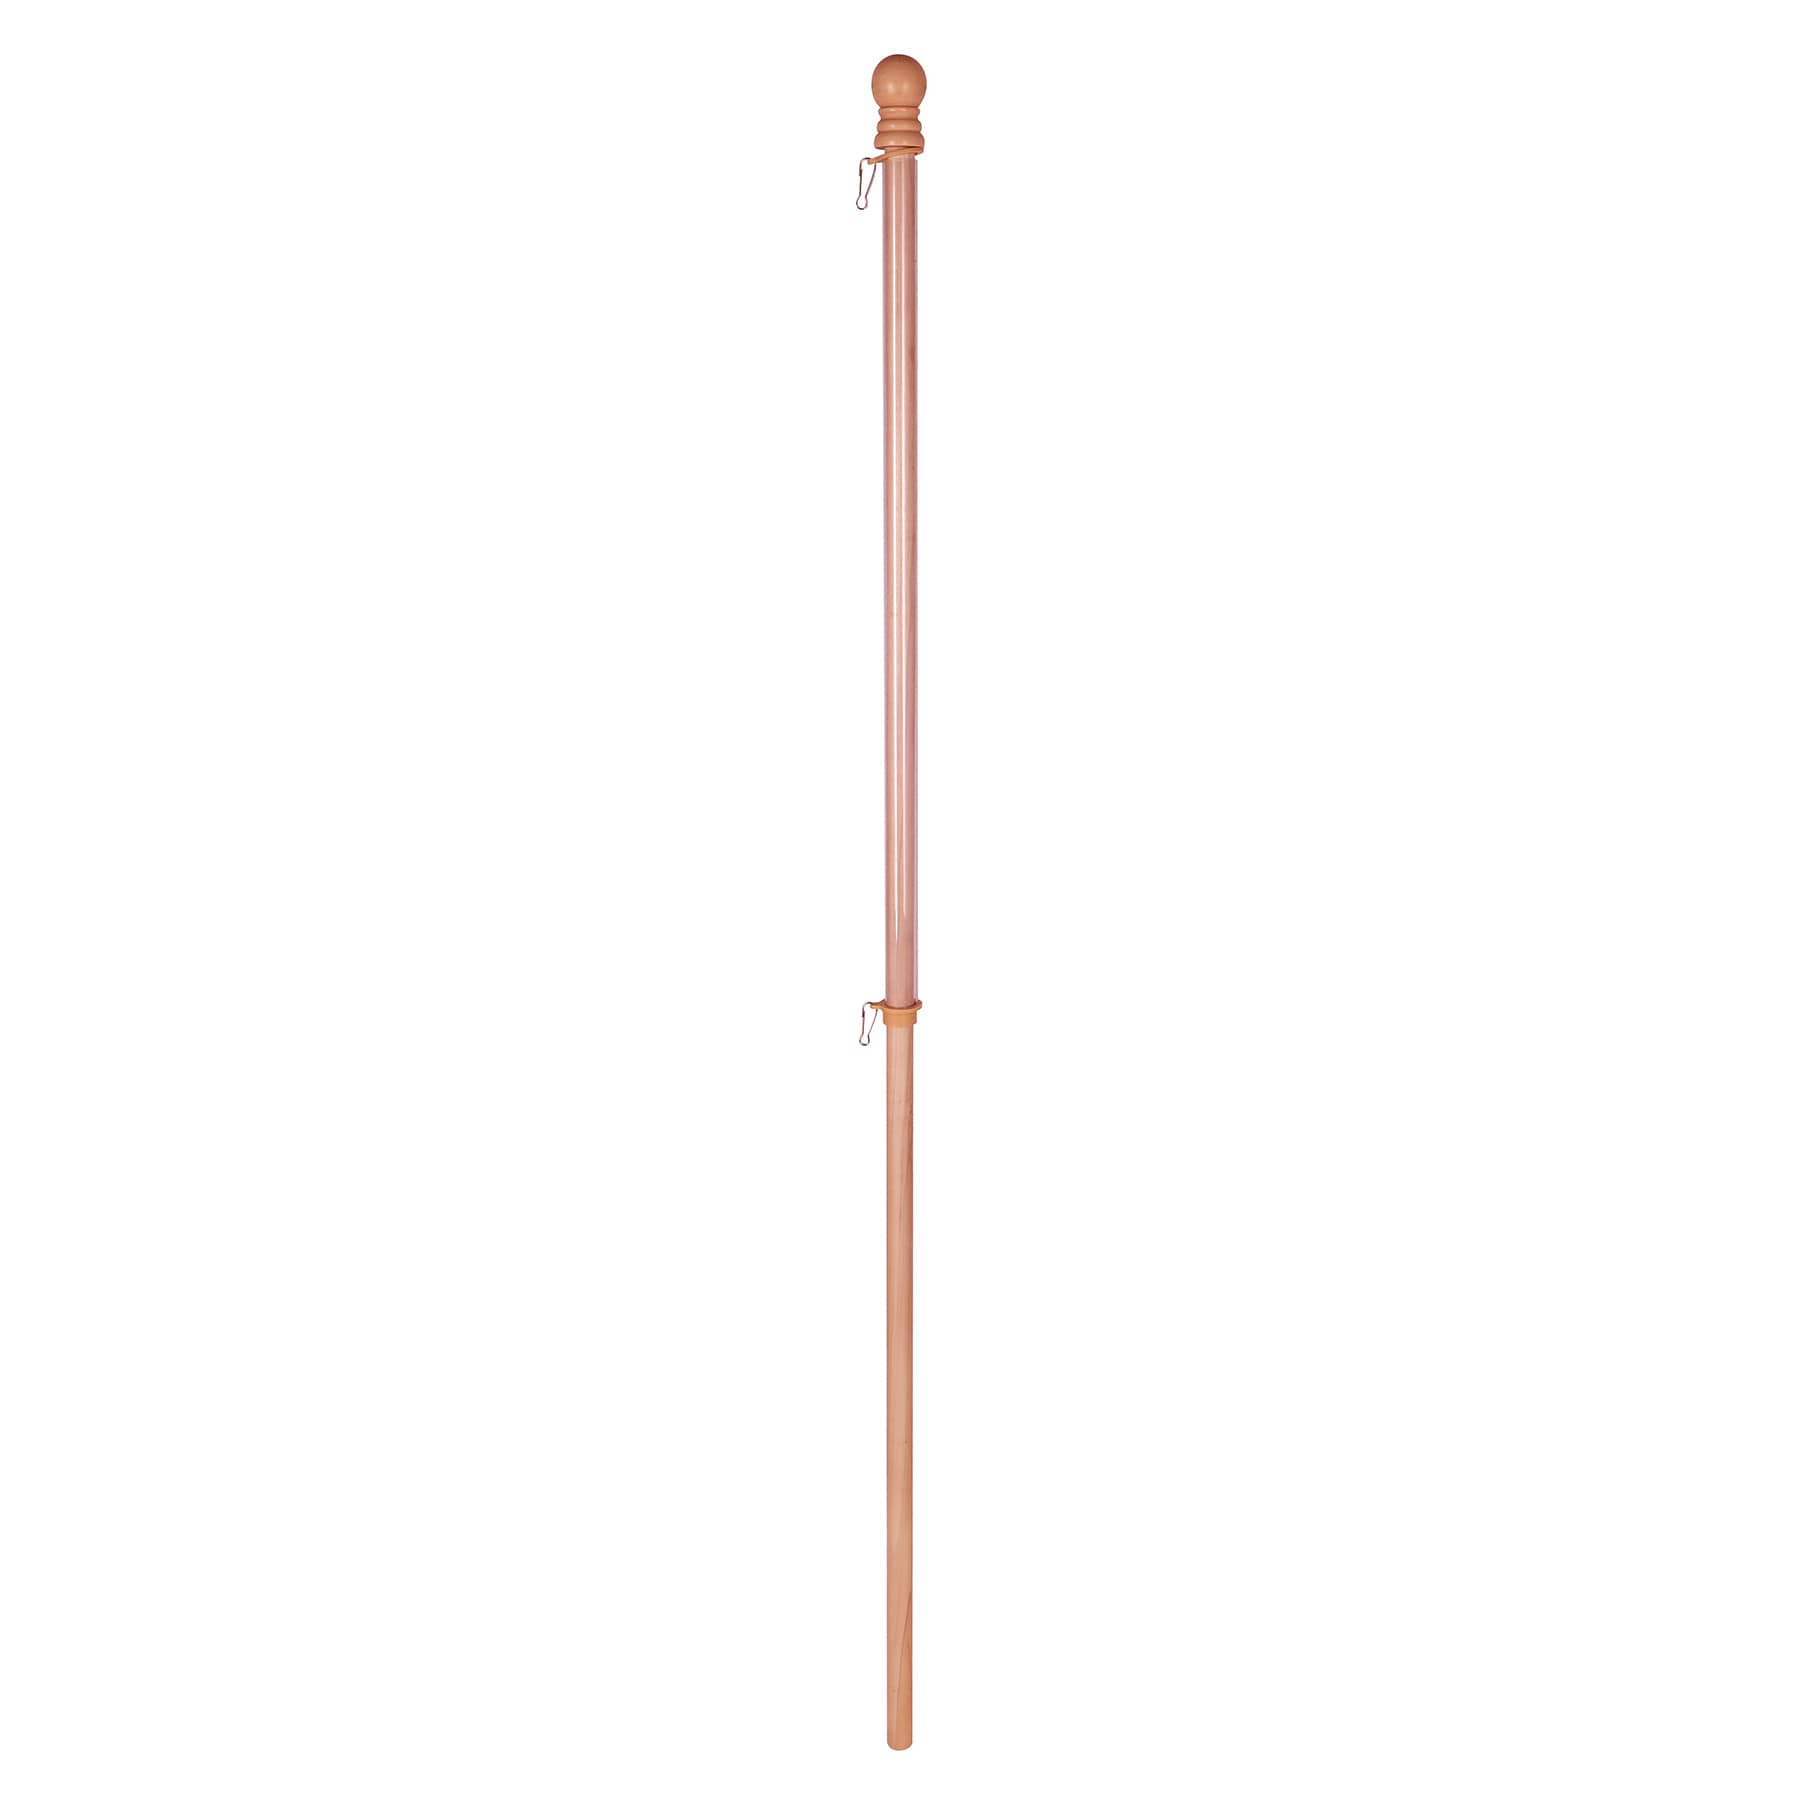 5 Feet Telescopic Handheld Flagpoles, ANLEY Portable Staff with Clips - Lightweight Extendable Stainless Steel with Anti-Slip Grip - Collapsable